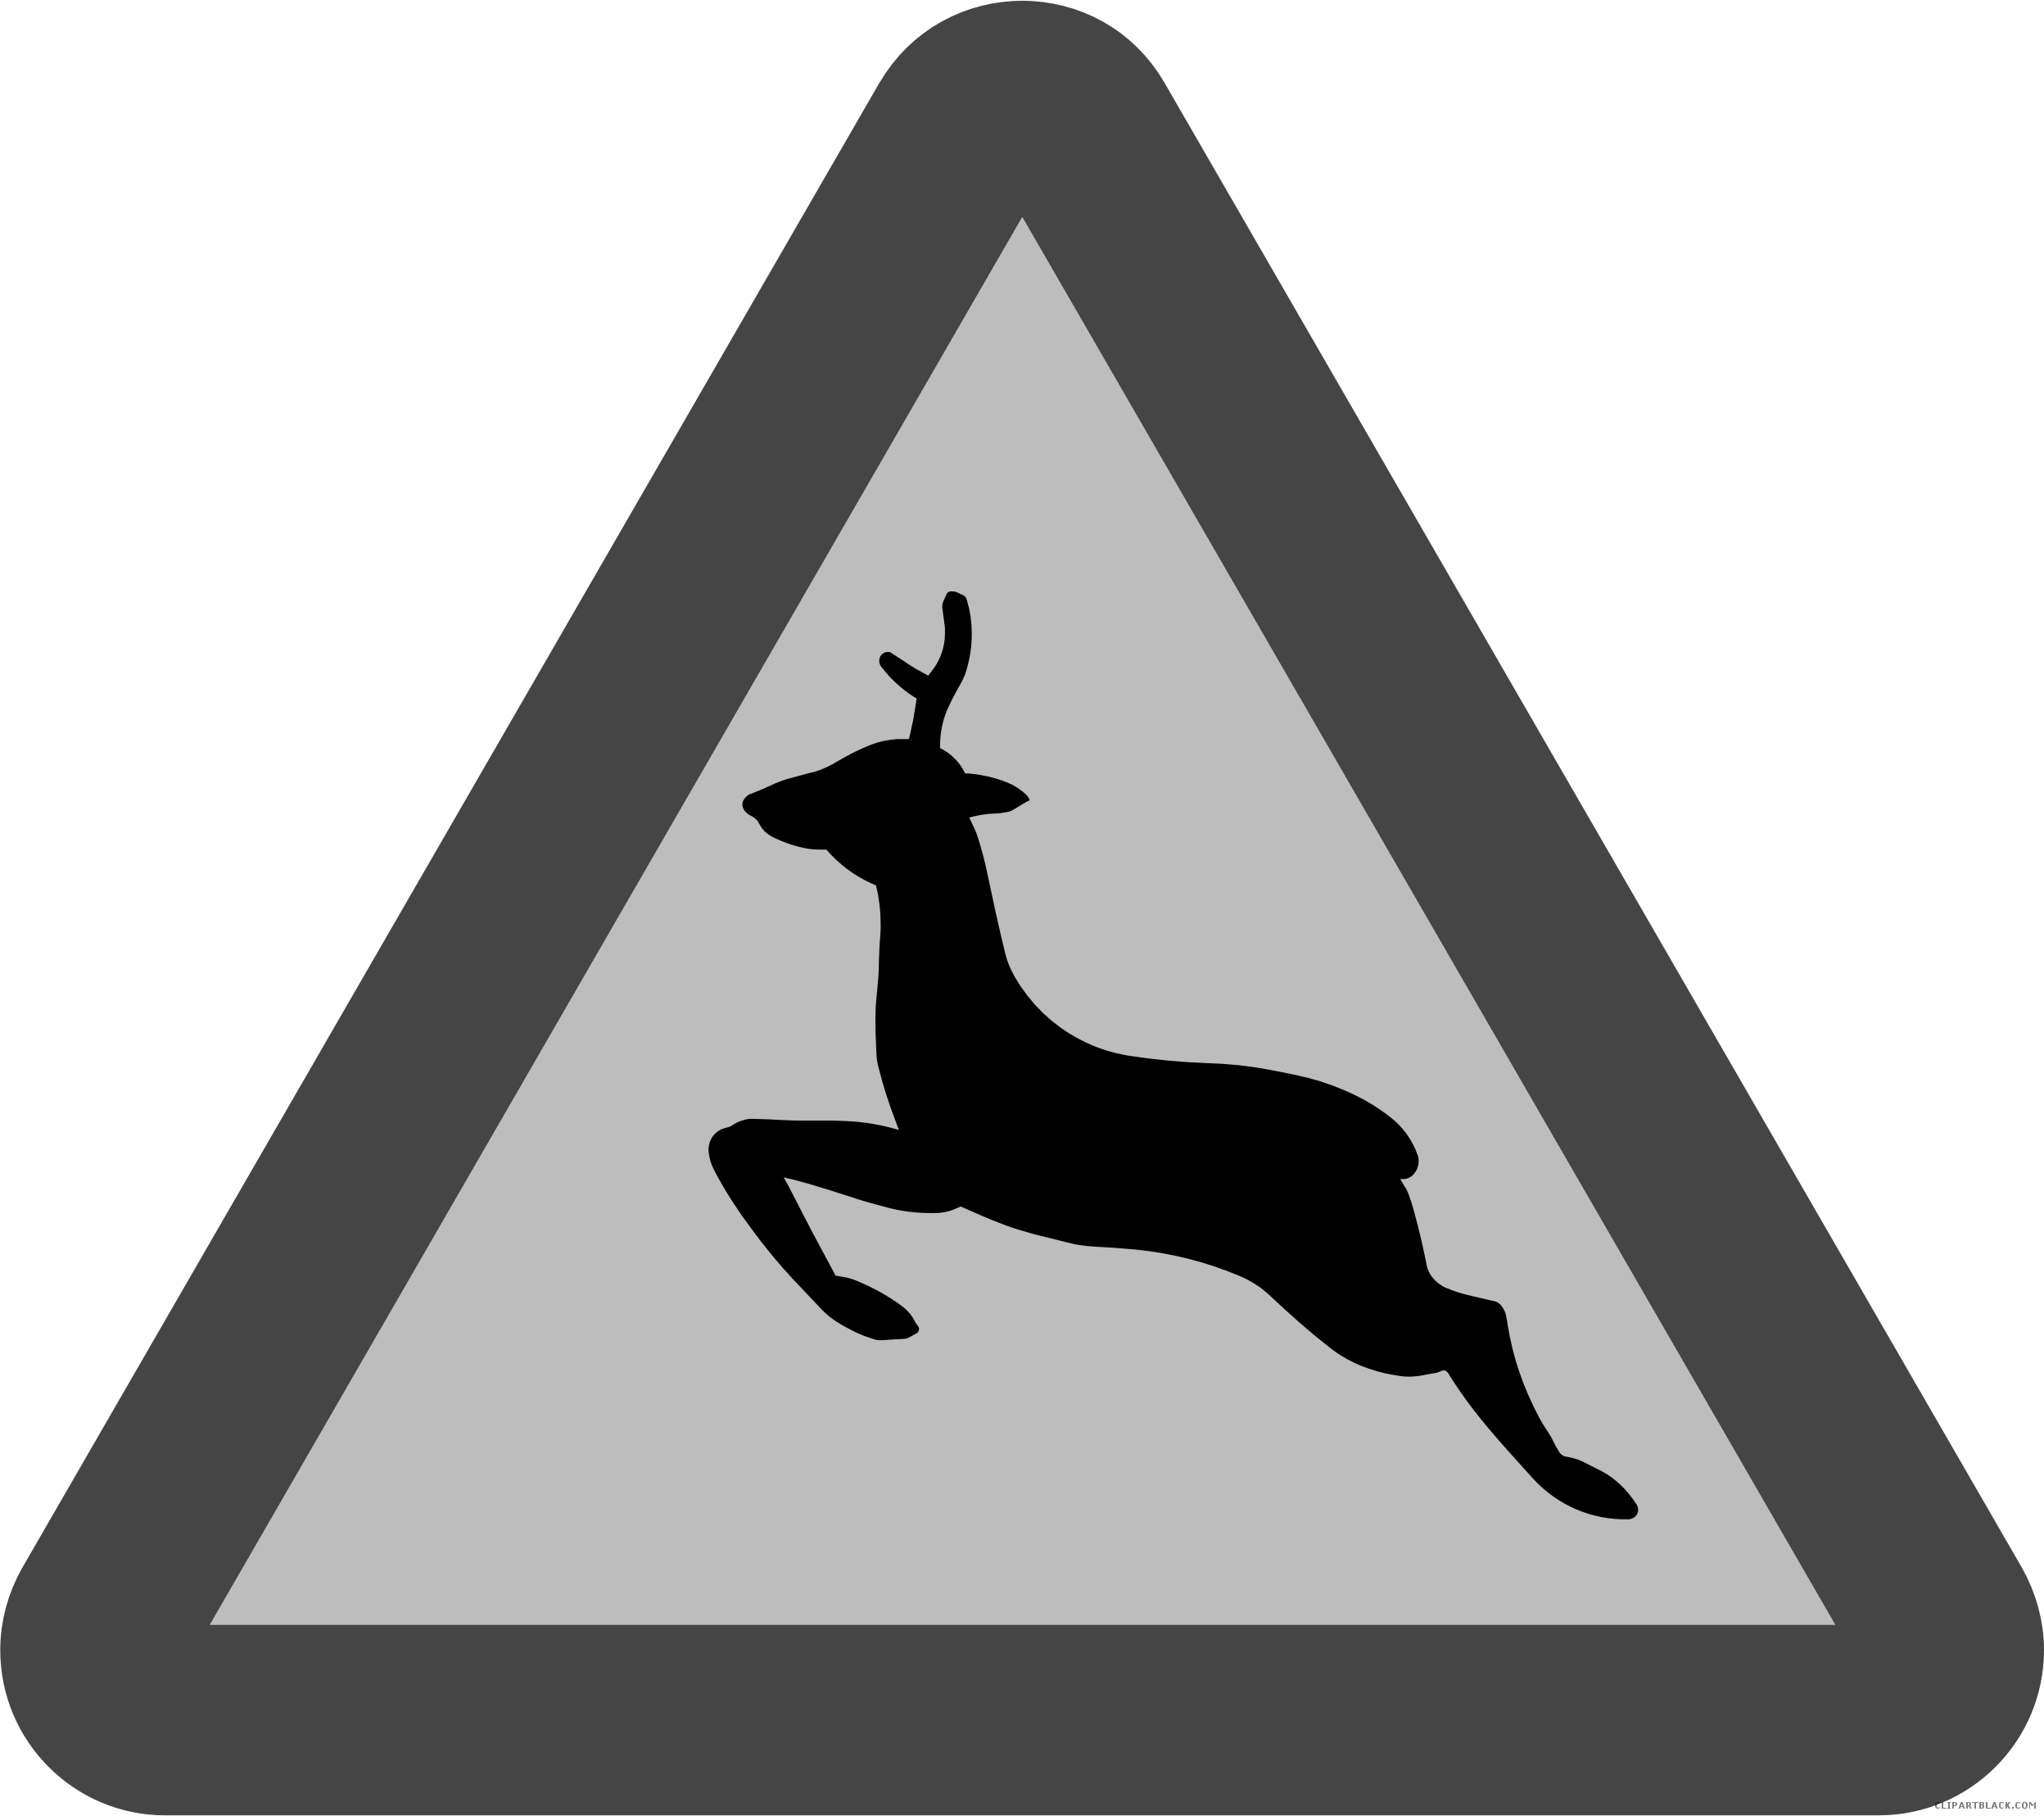 Deer Animal Free Black White Clipart Images Clipartblack - Zazzle Deer Warning Keychain (2496x2217)